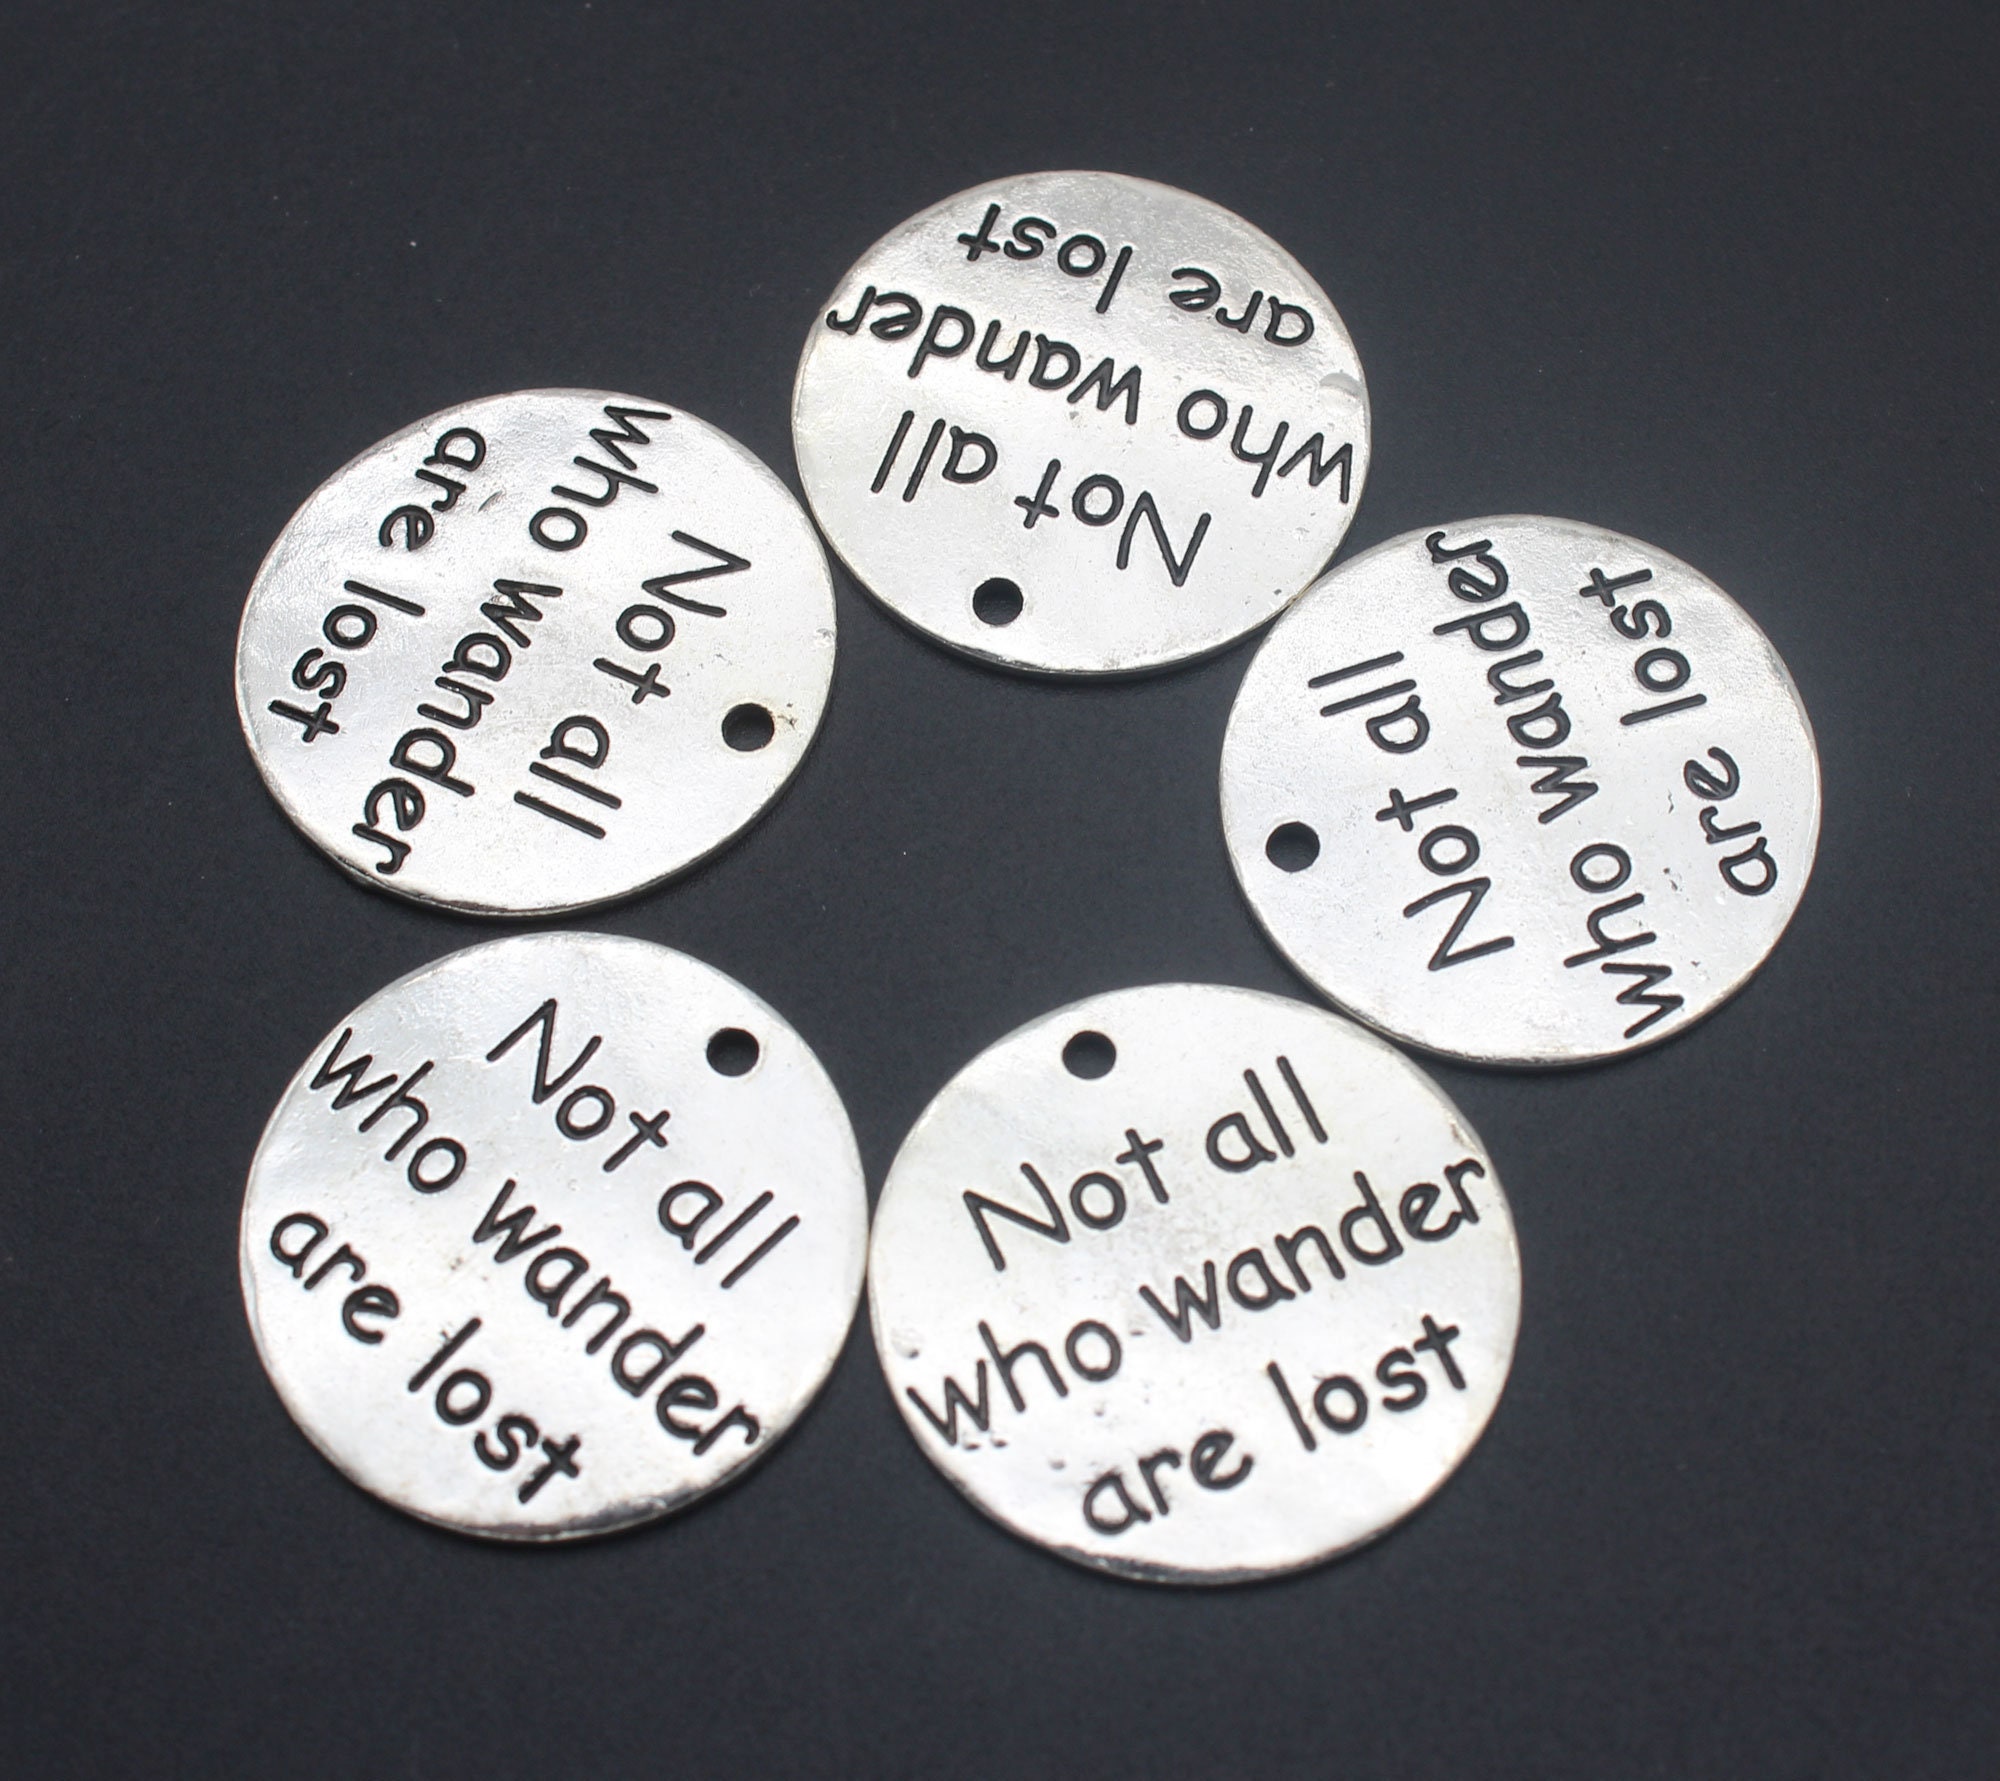 5Pcs-Not All Who Wander Are Lost Charm Pendant, Alloy Charm, Bulk Charm-25MYf176